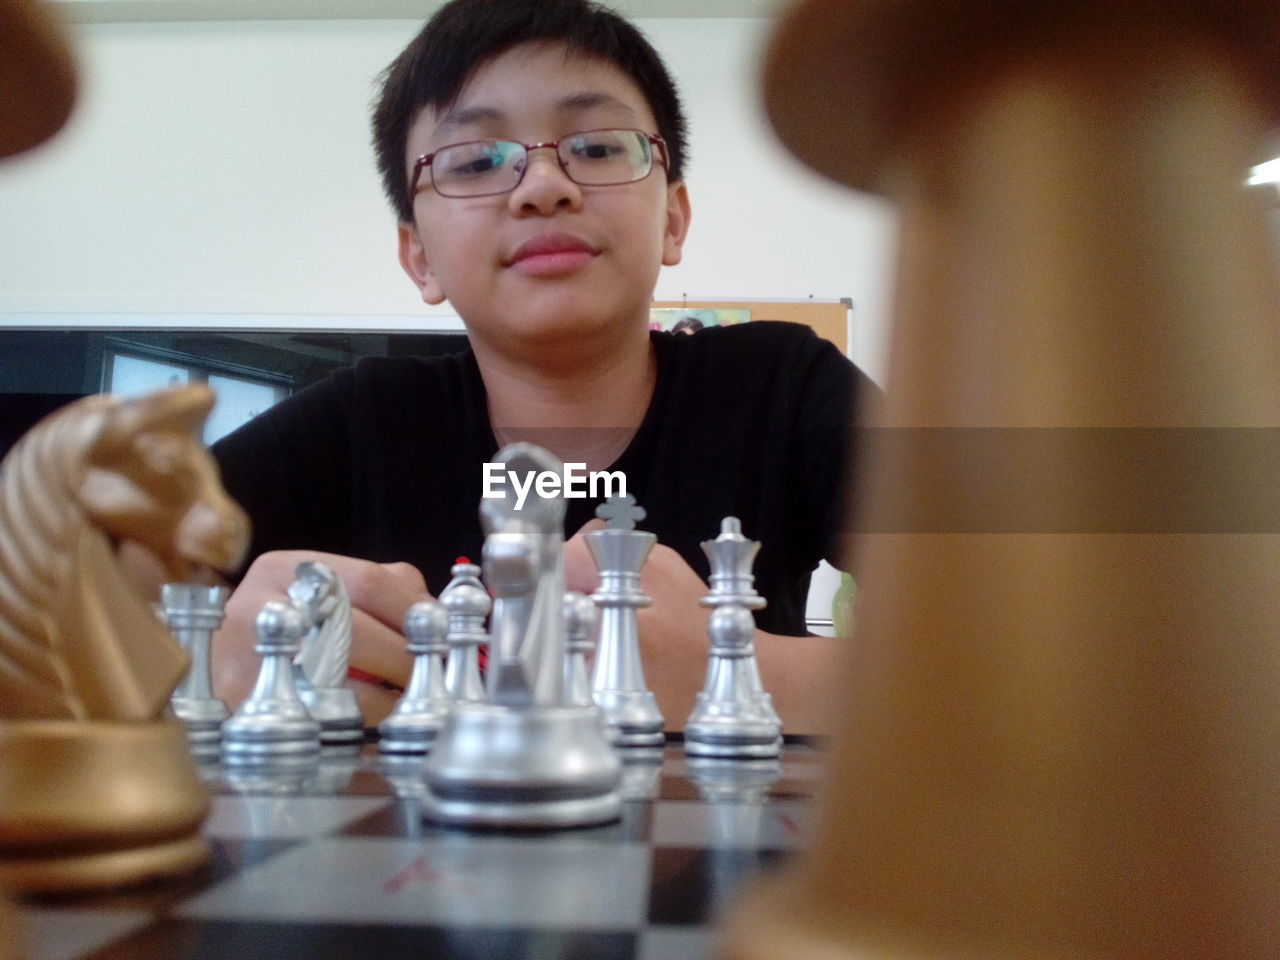 Boy playing chess during competition